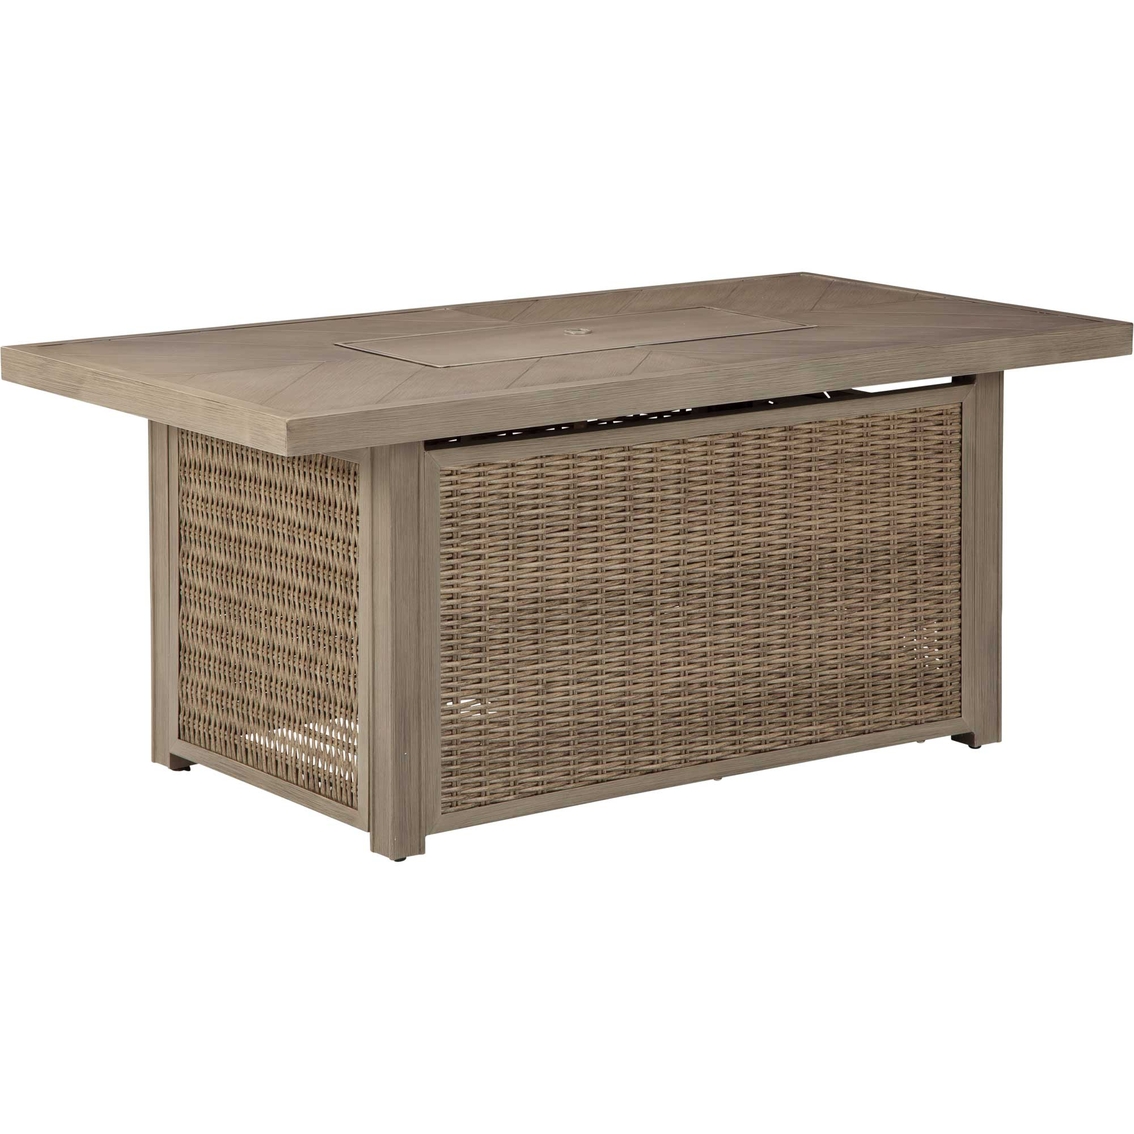 Signature Design by Ashley Calworth Outdoor 10 pc. Set with Firepit Table - Image 9 of 10